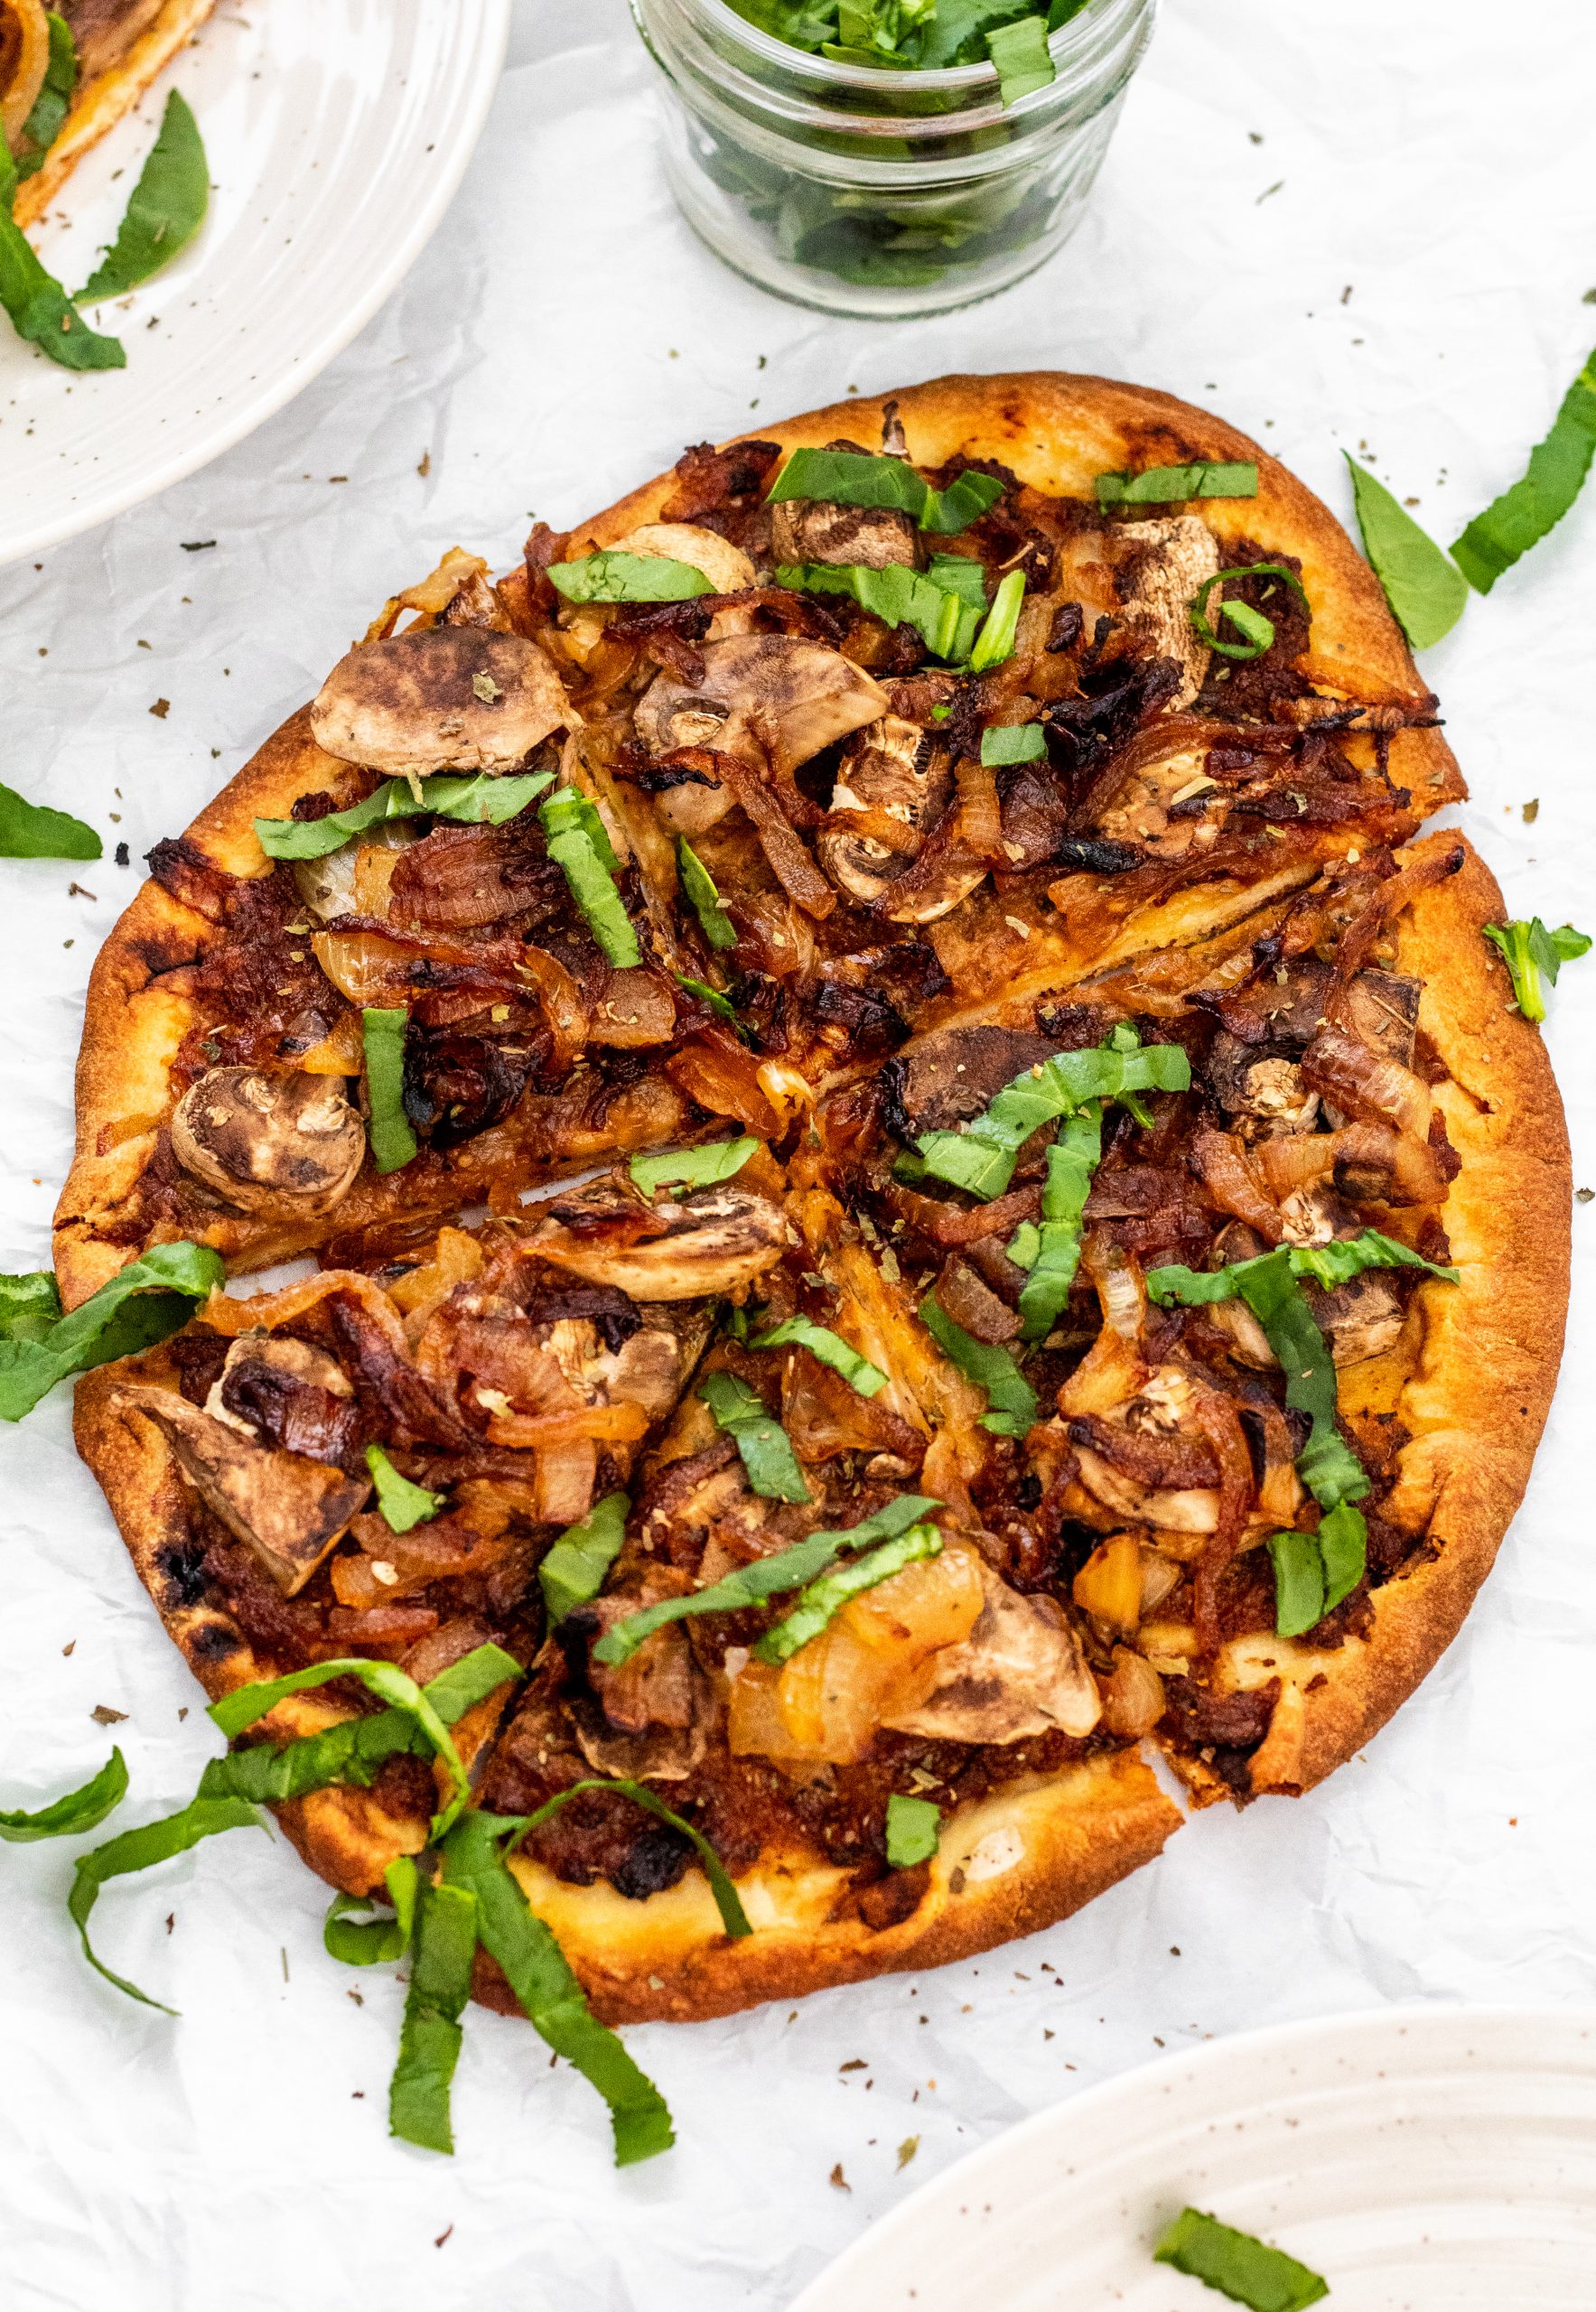 caramelized onion and mushroom naan bread pizza